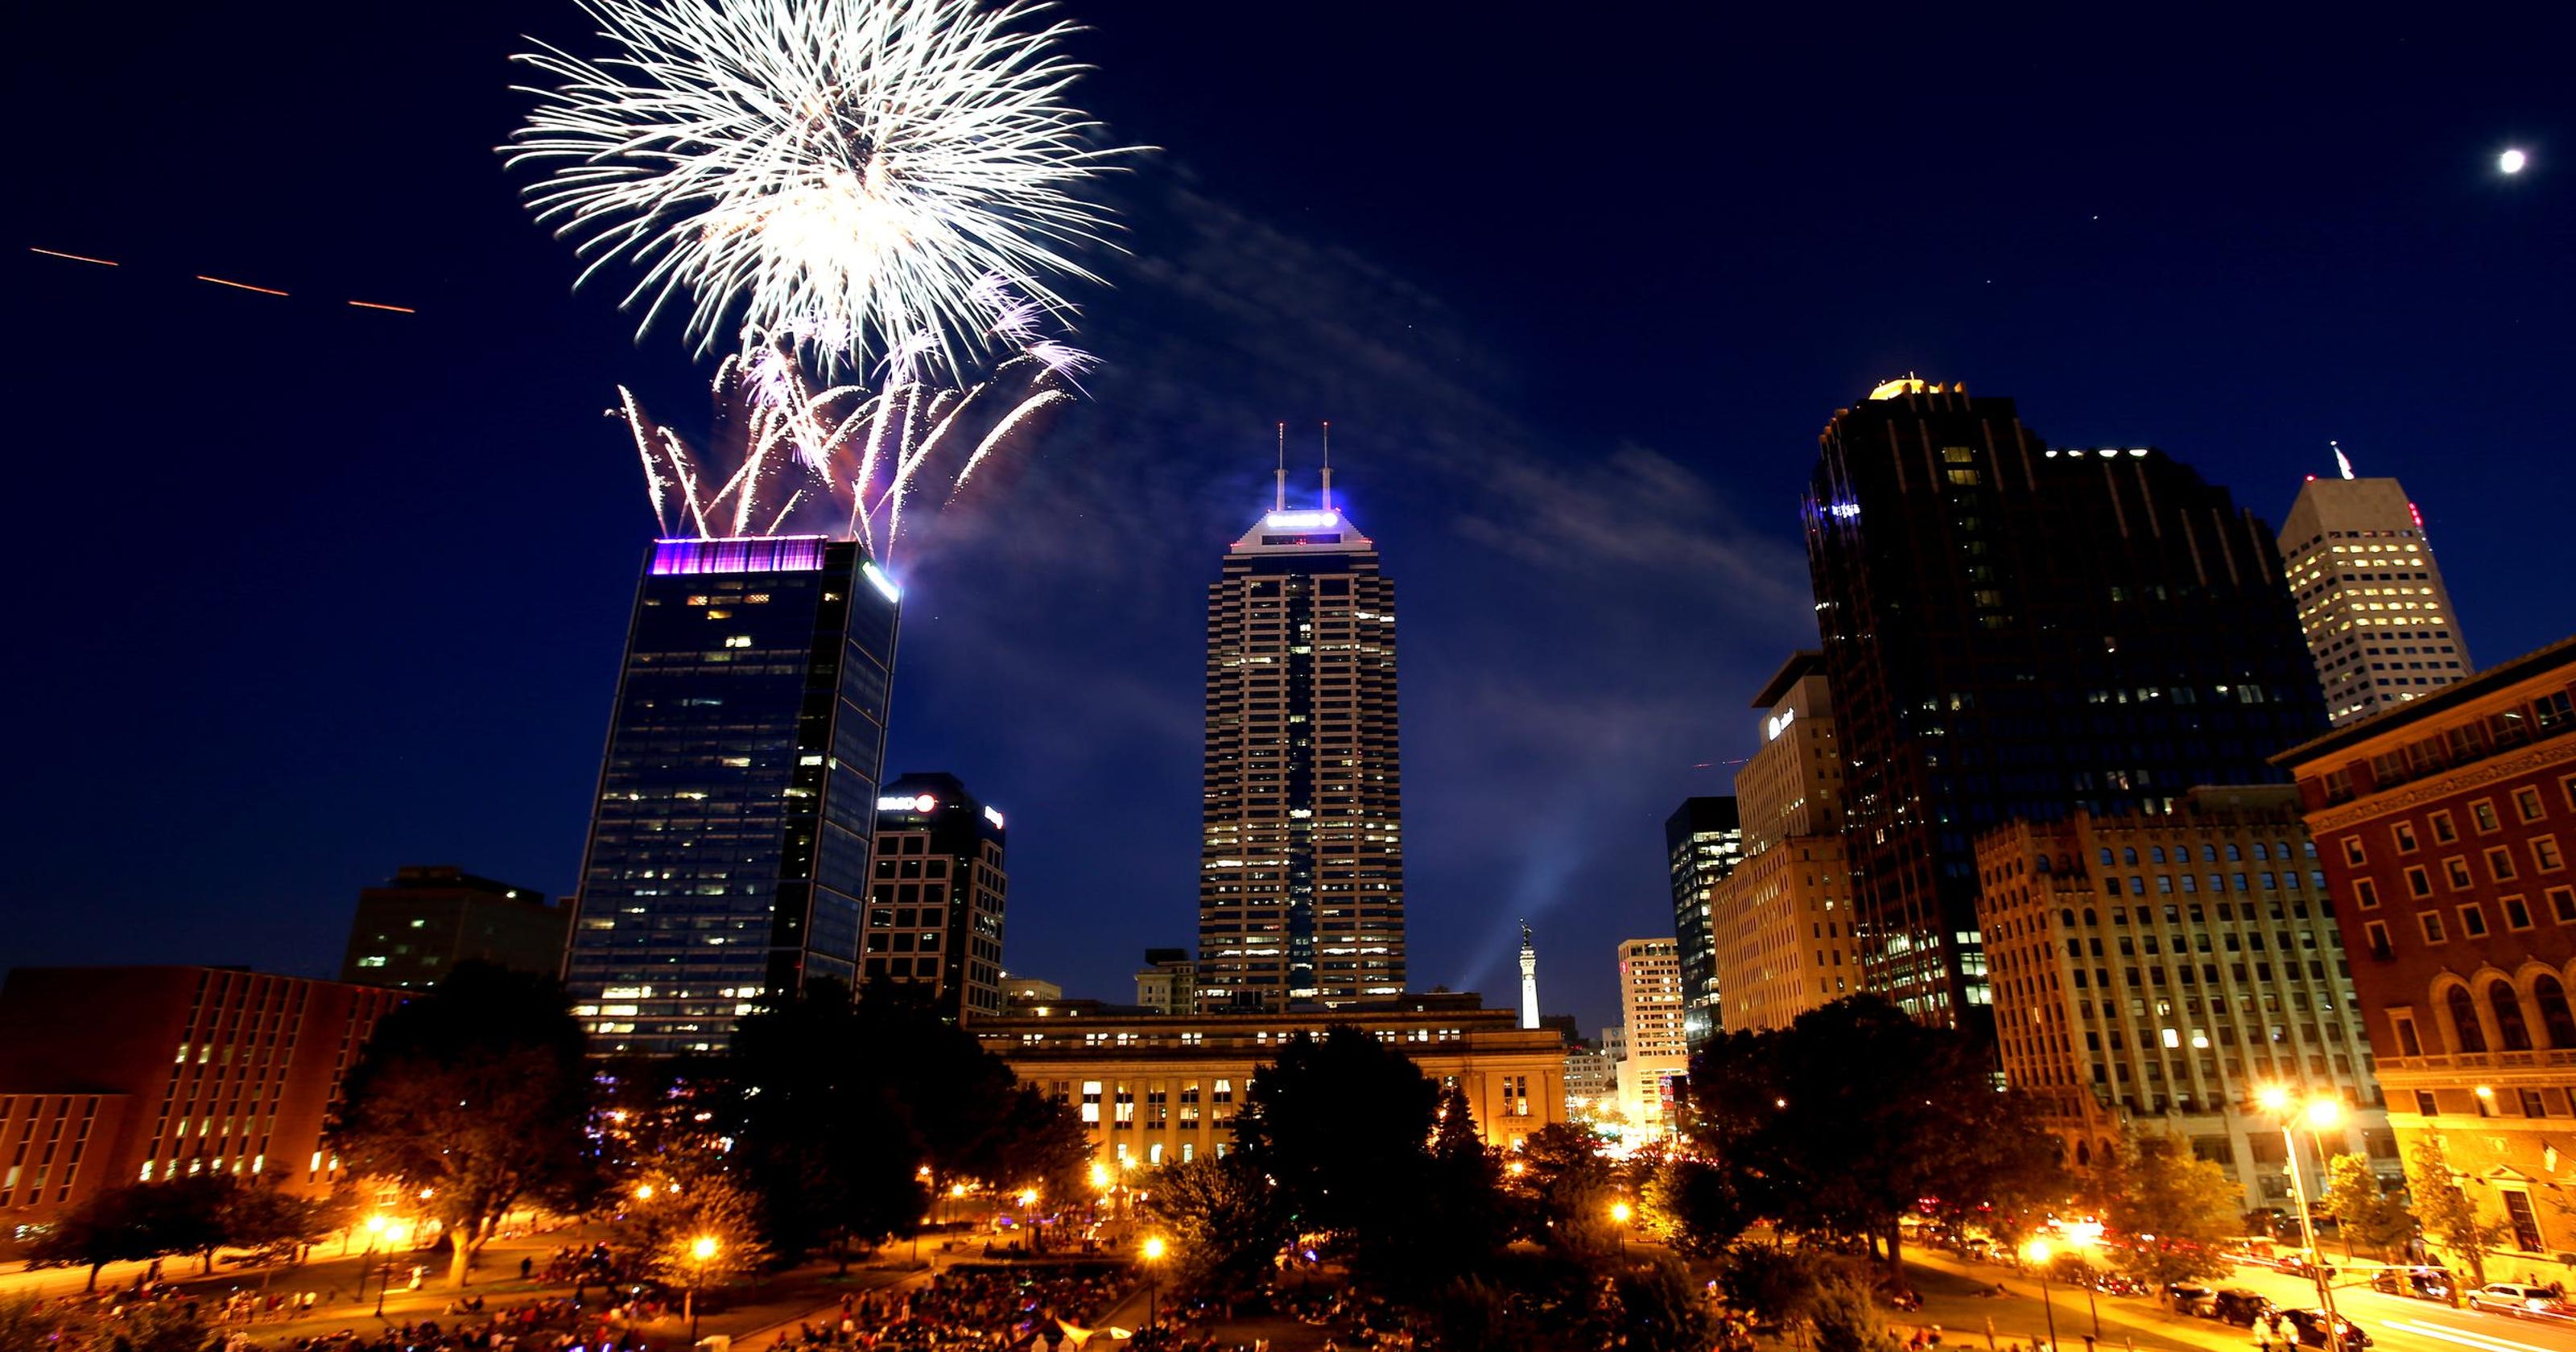 Hot spots to see fireworks in Indy area